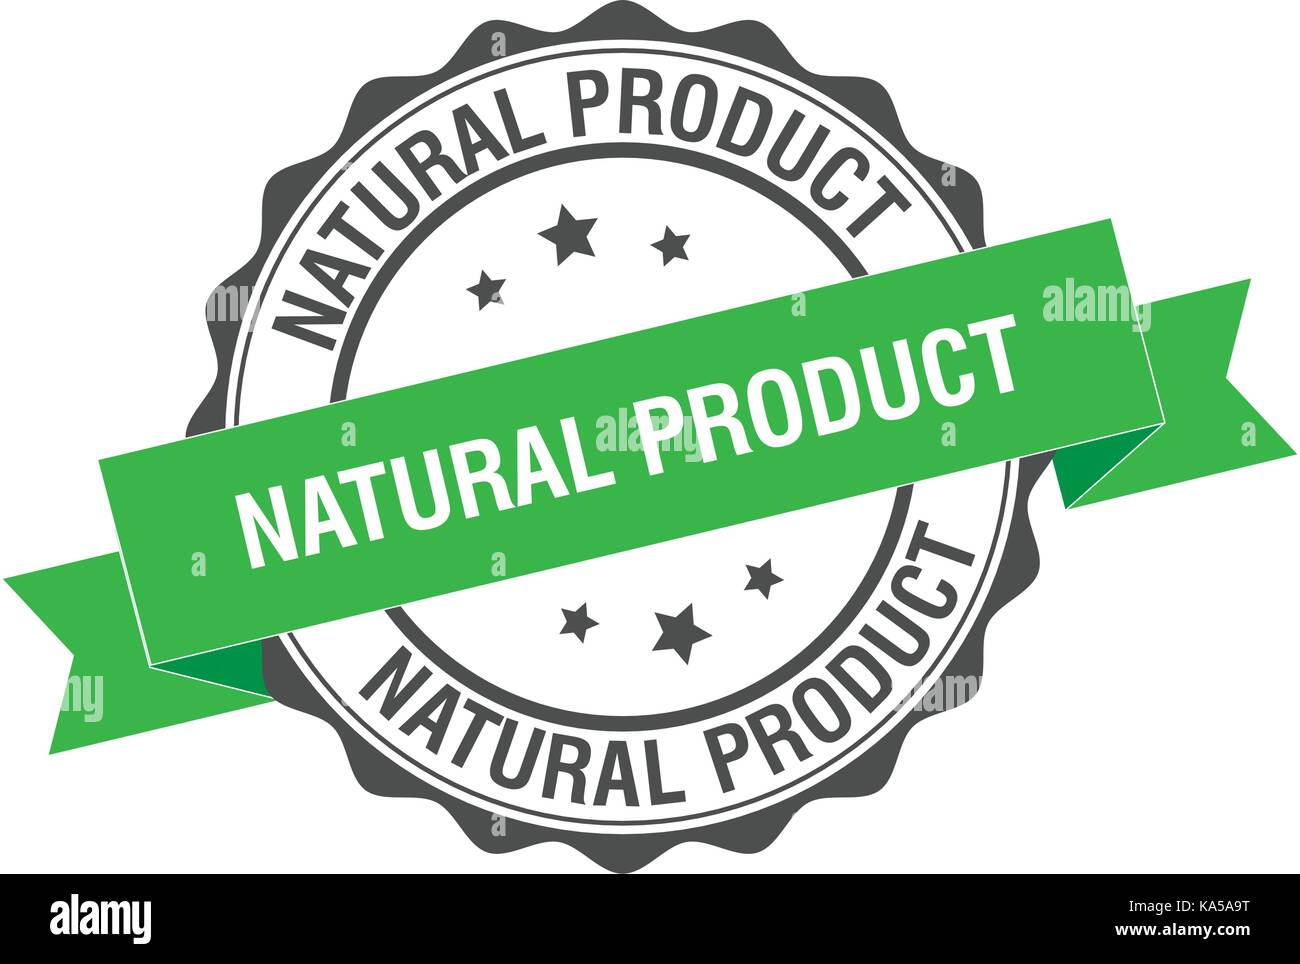 Natural product stamp illustration Stock Vector